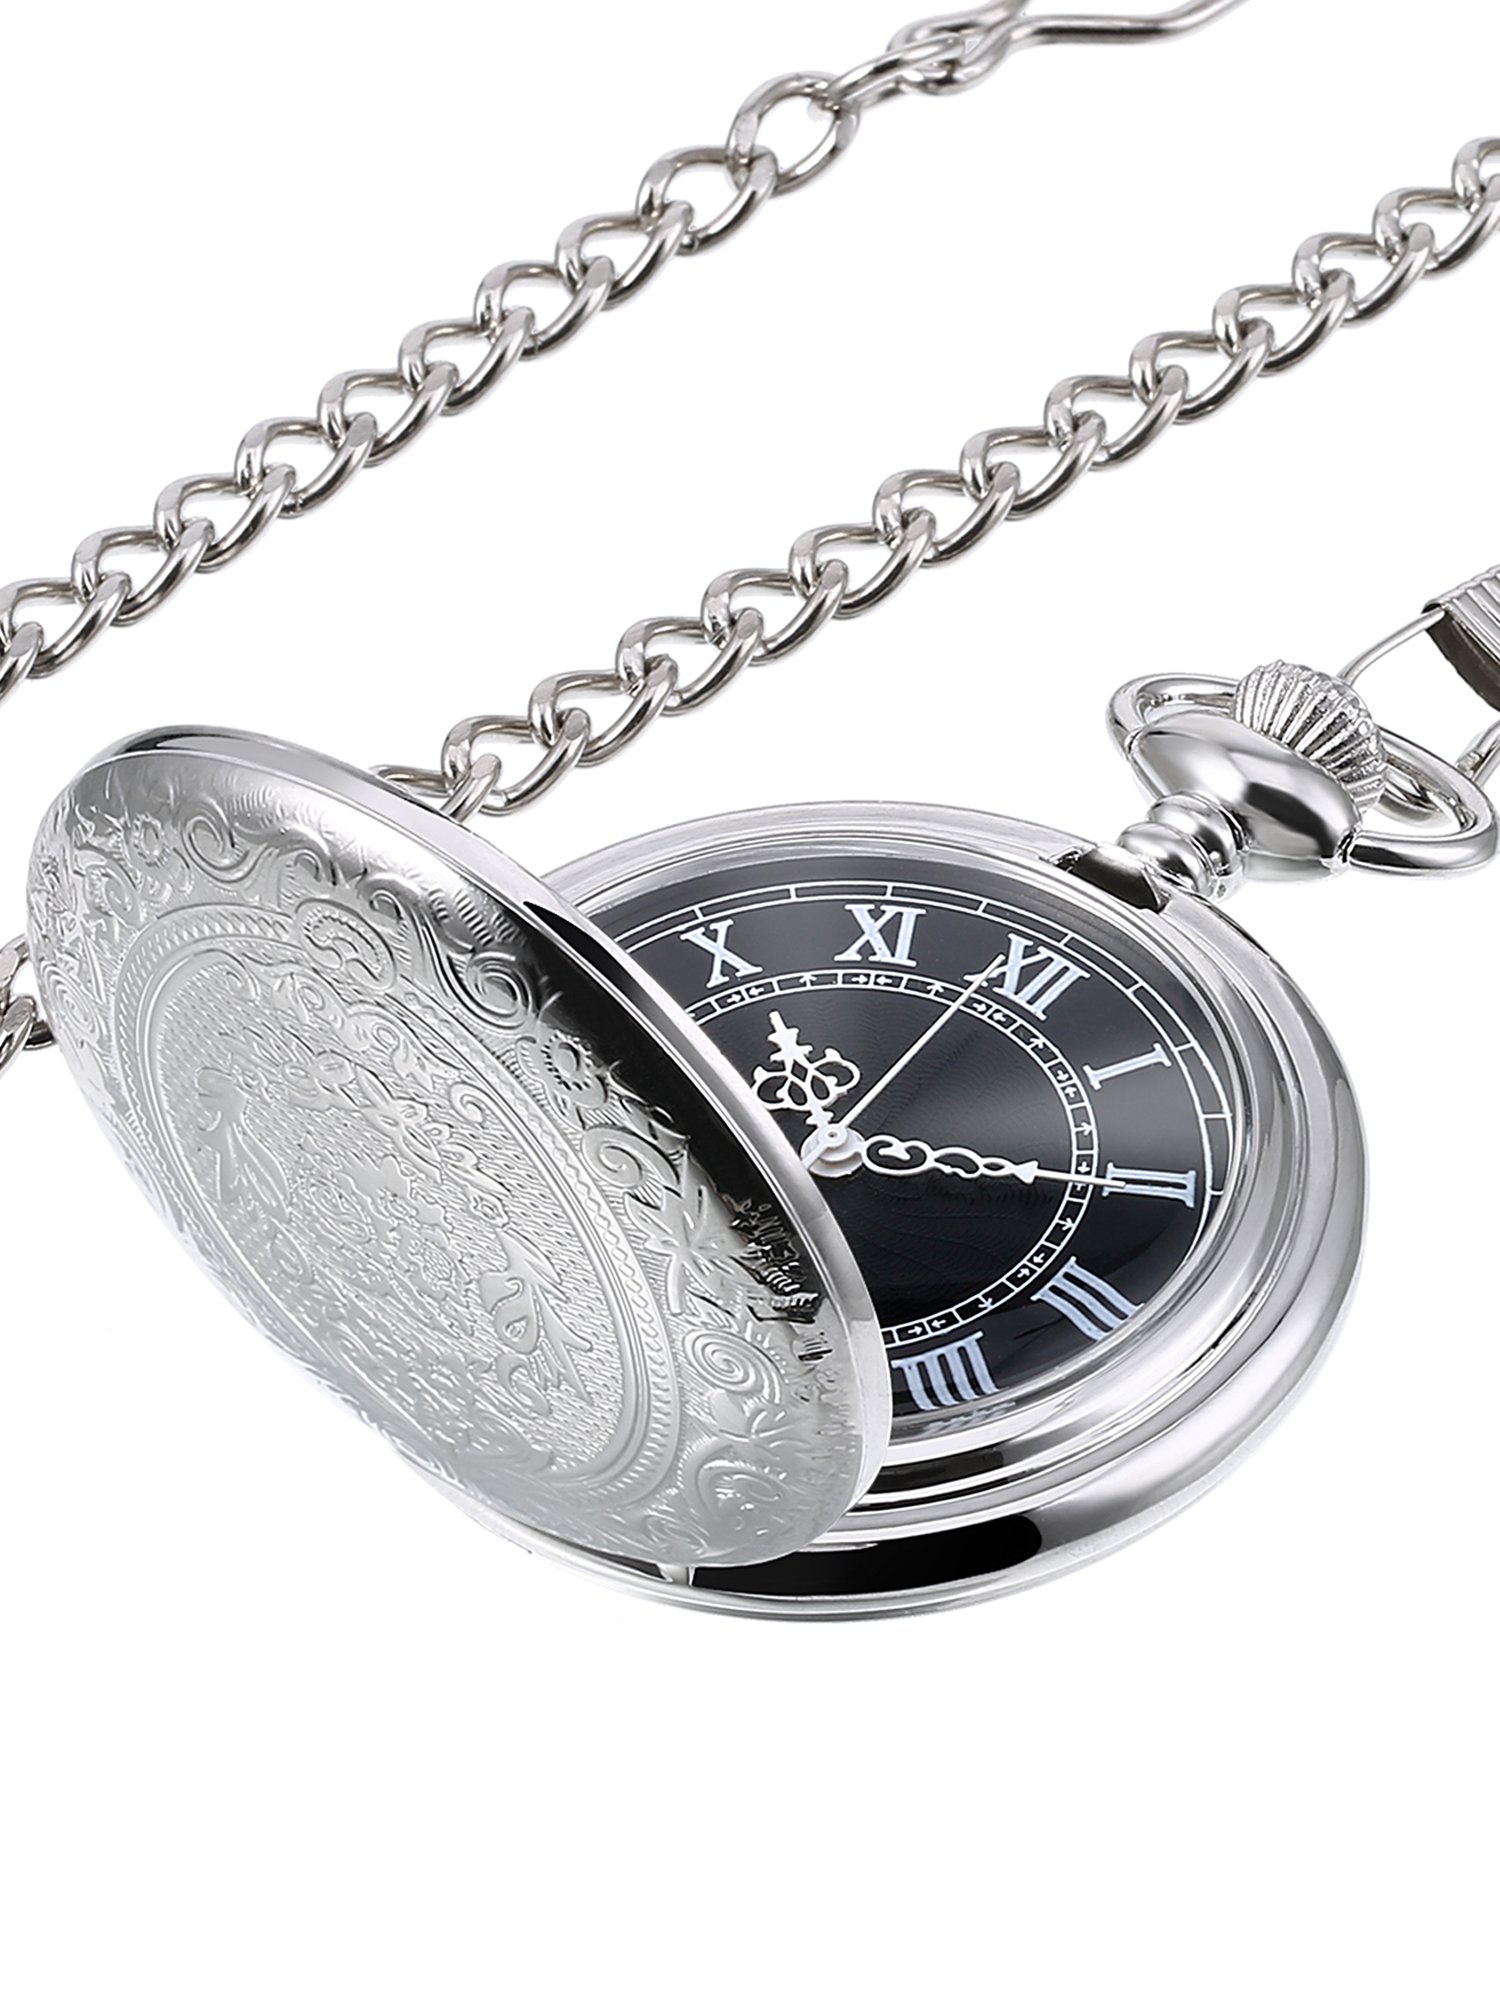 Hicarer Quartz Pocket Watch for Men with Black Dial and Chain Vintage Roman Numerals Christmas Gifts Birthday